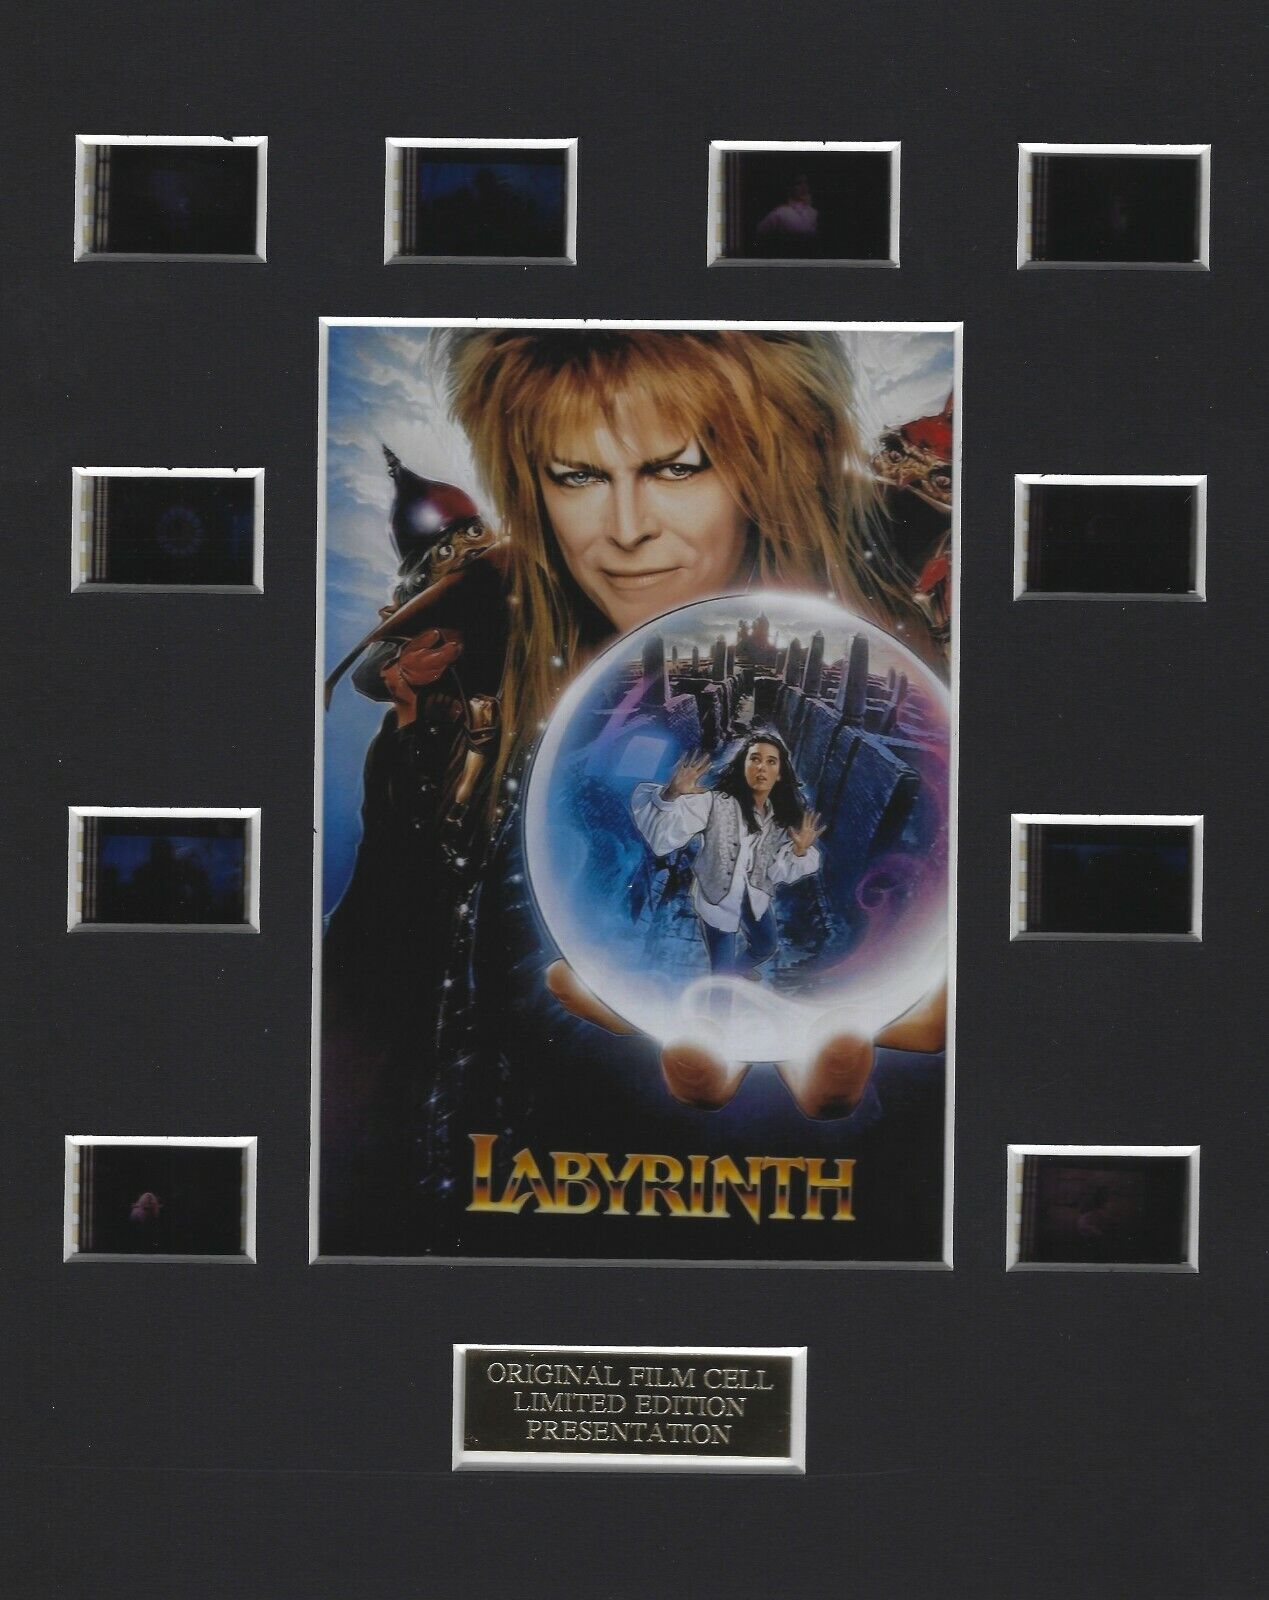 Labyrinth (1986) Authentic 35mm Movie Film Cell 8x10 Matted Display - W/coa